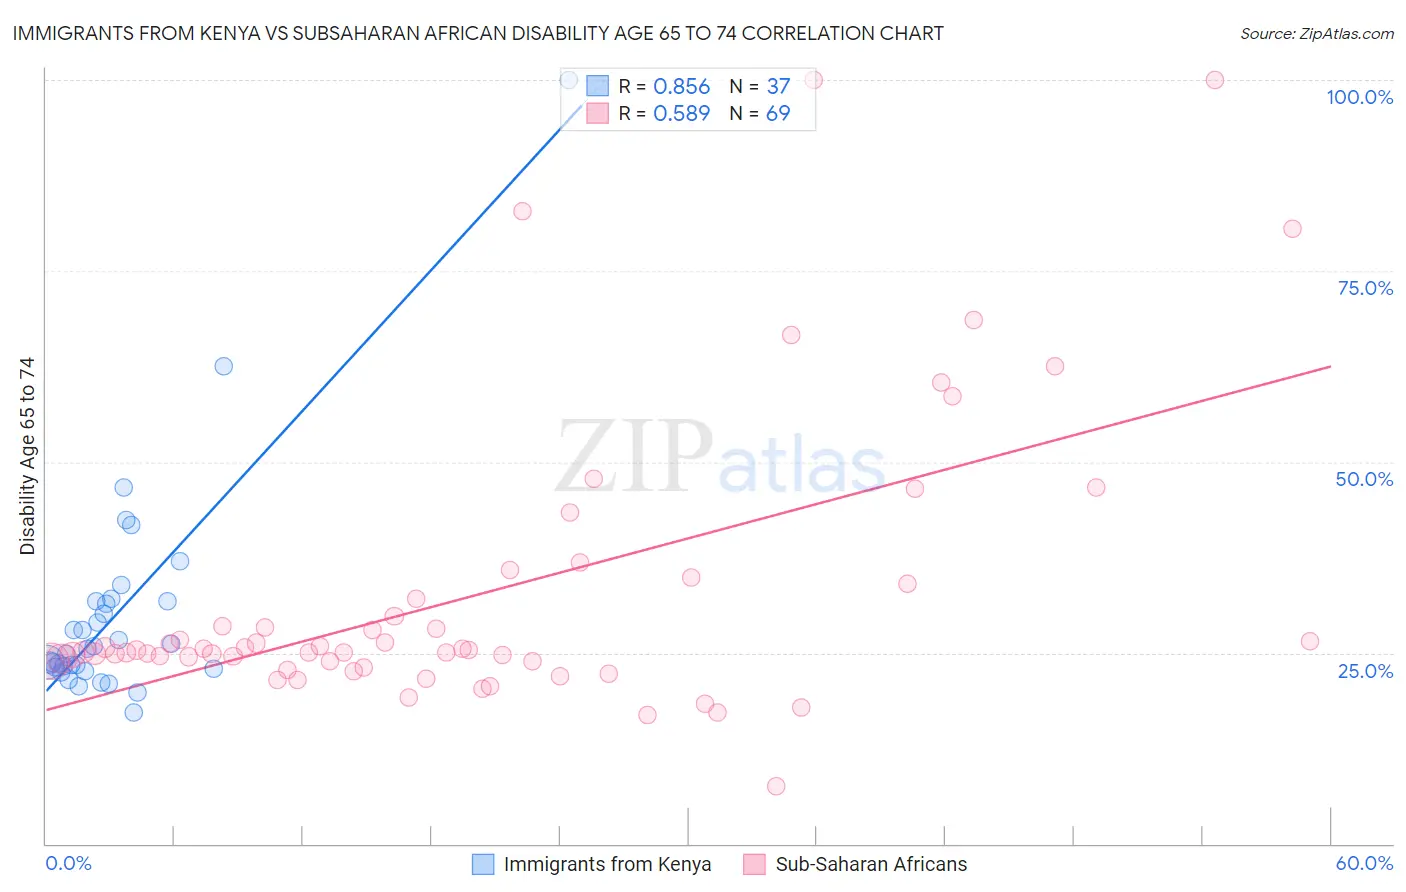 Immigrants from Kenya vs Subsaharan African Disability Age 65 to 74